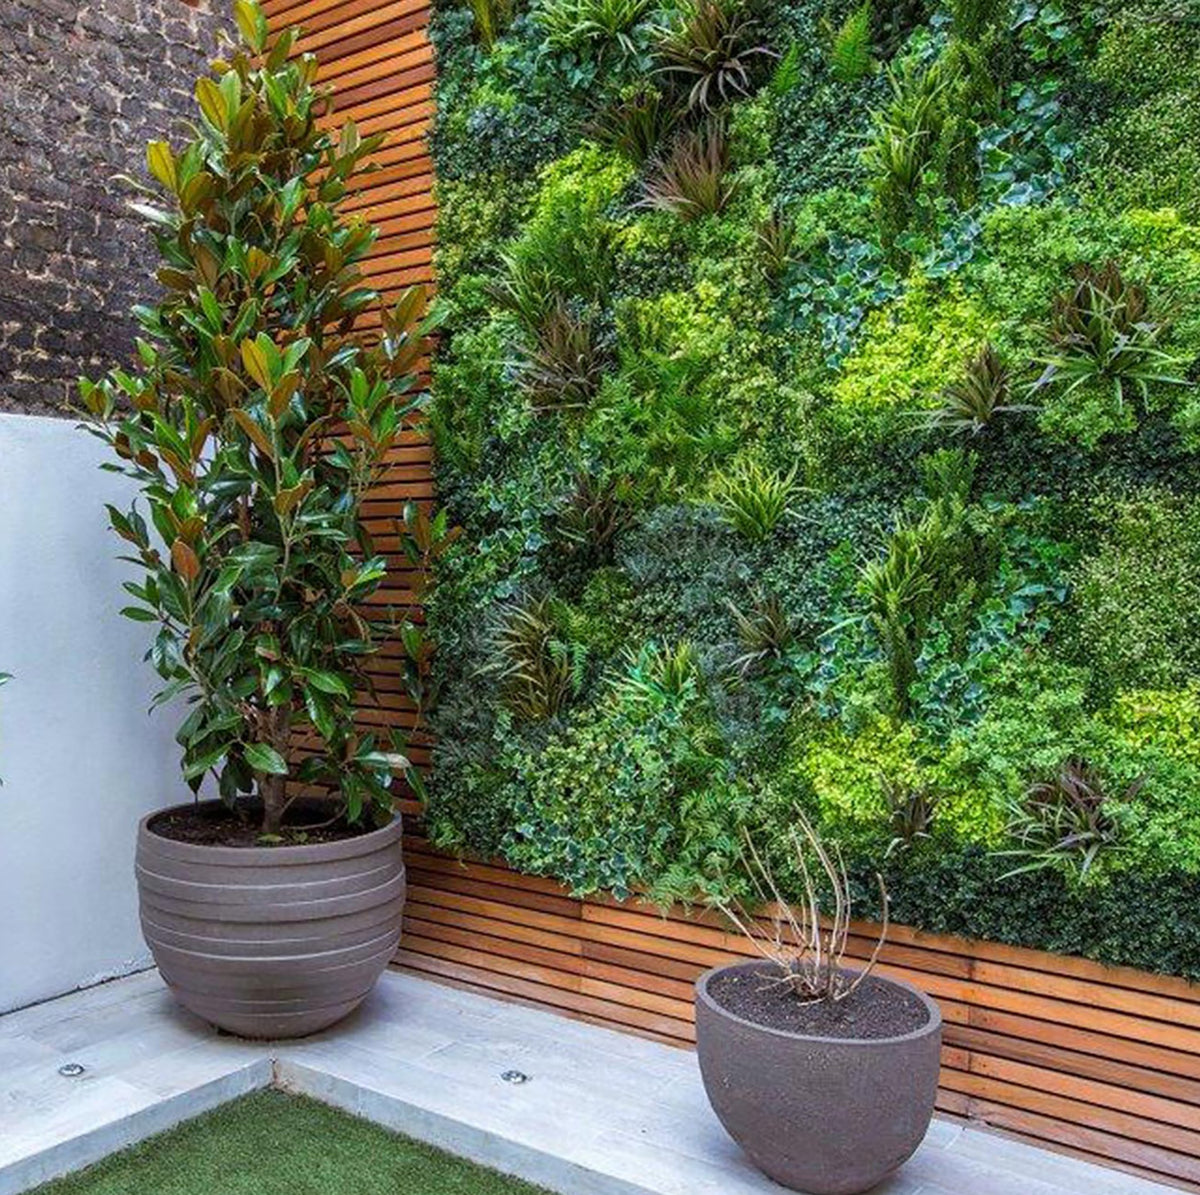 Artificial Green Wall System, Complete Kit by VistaFolia